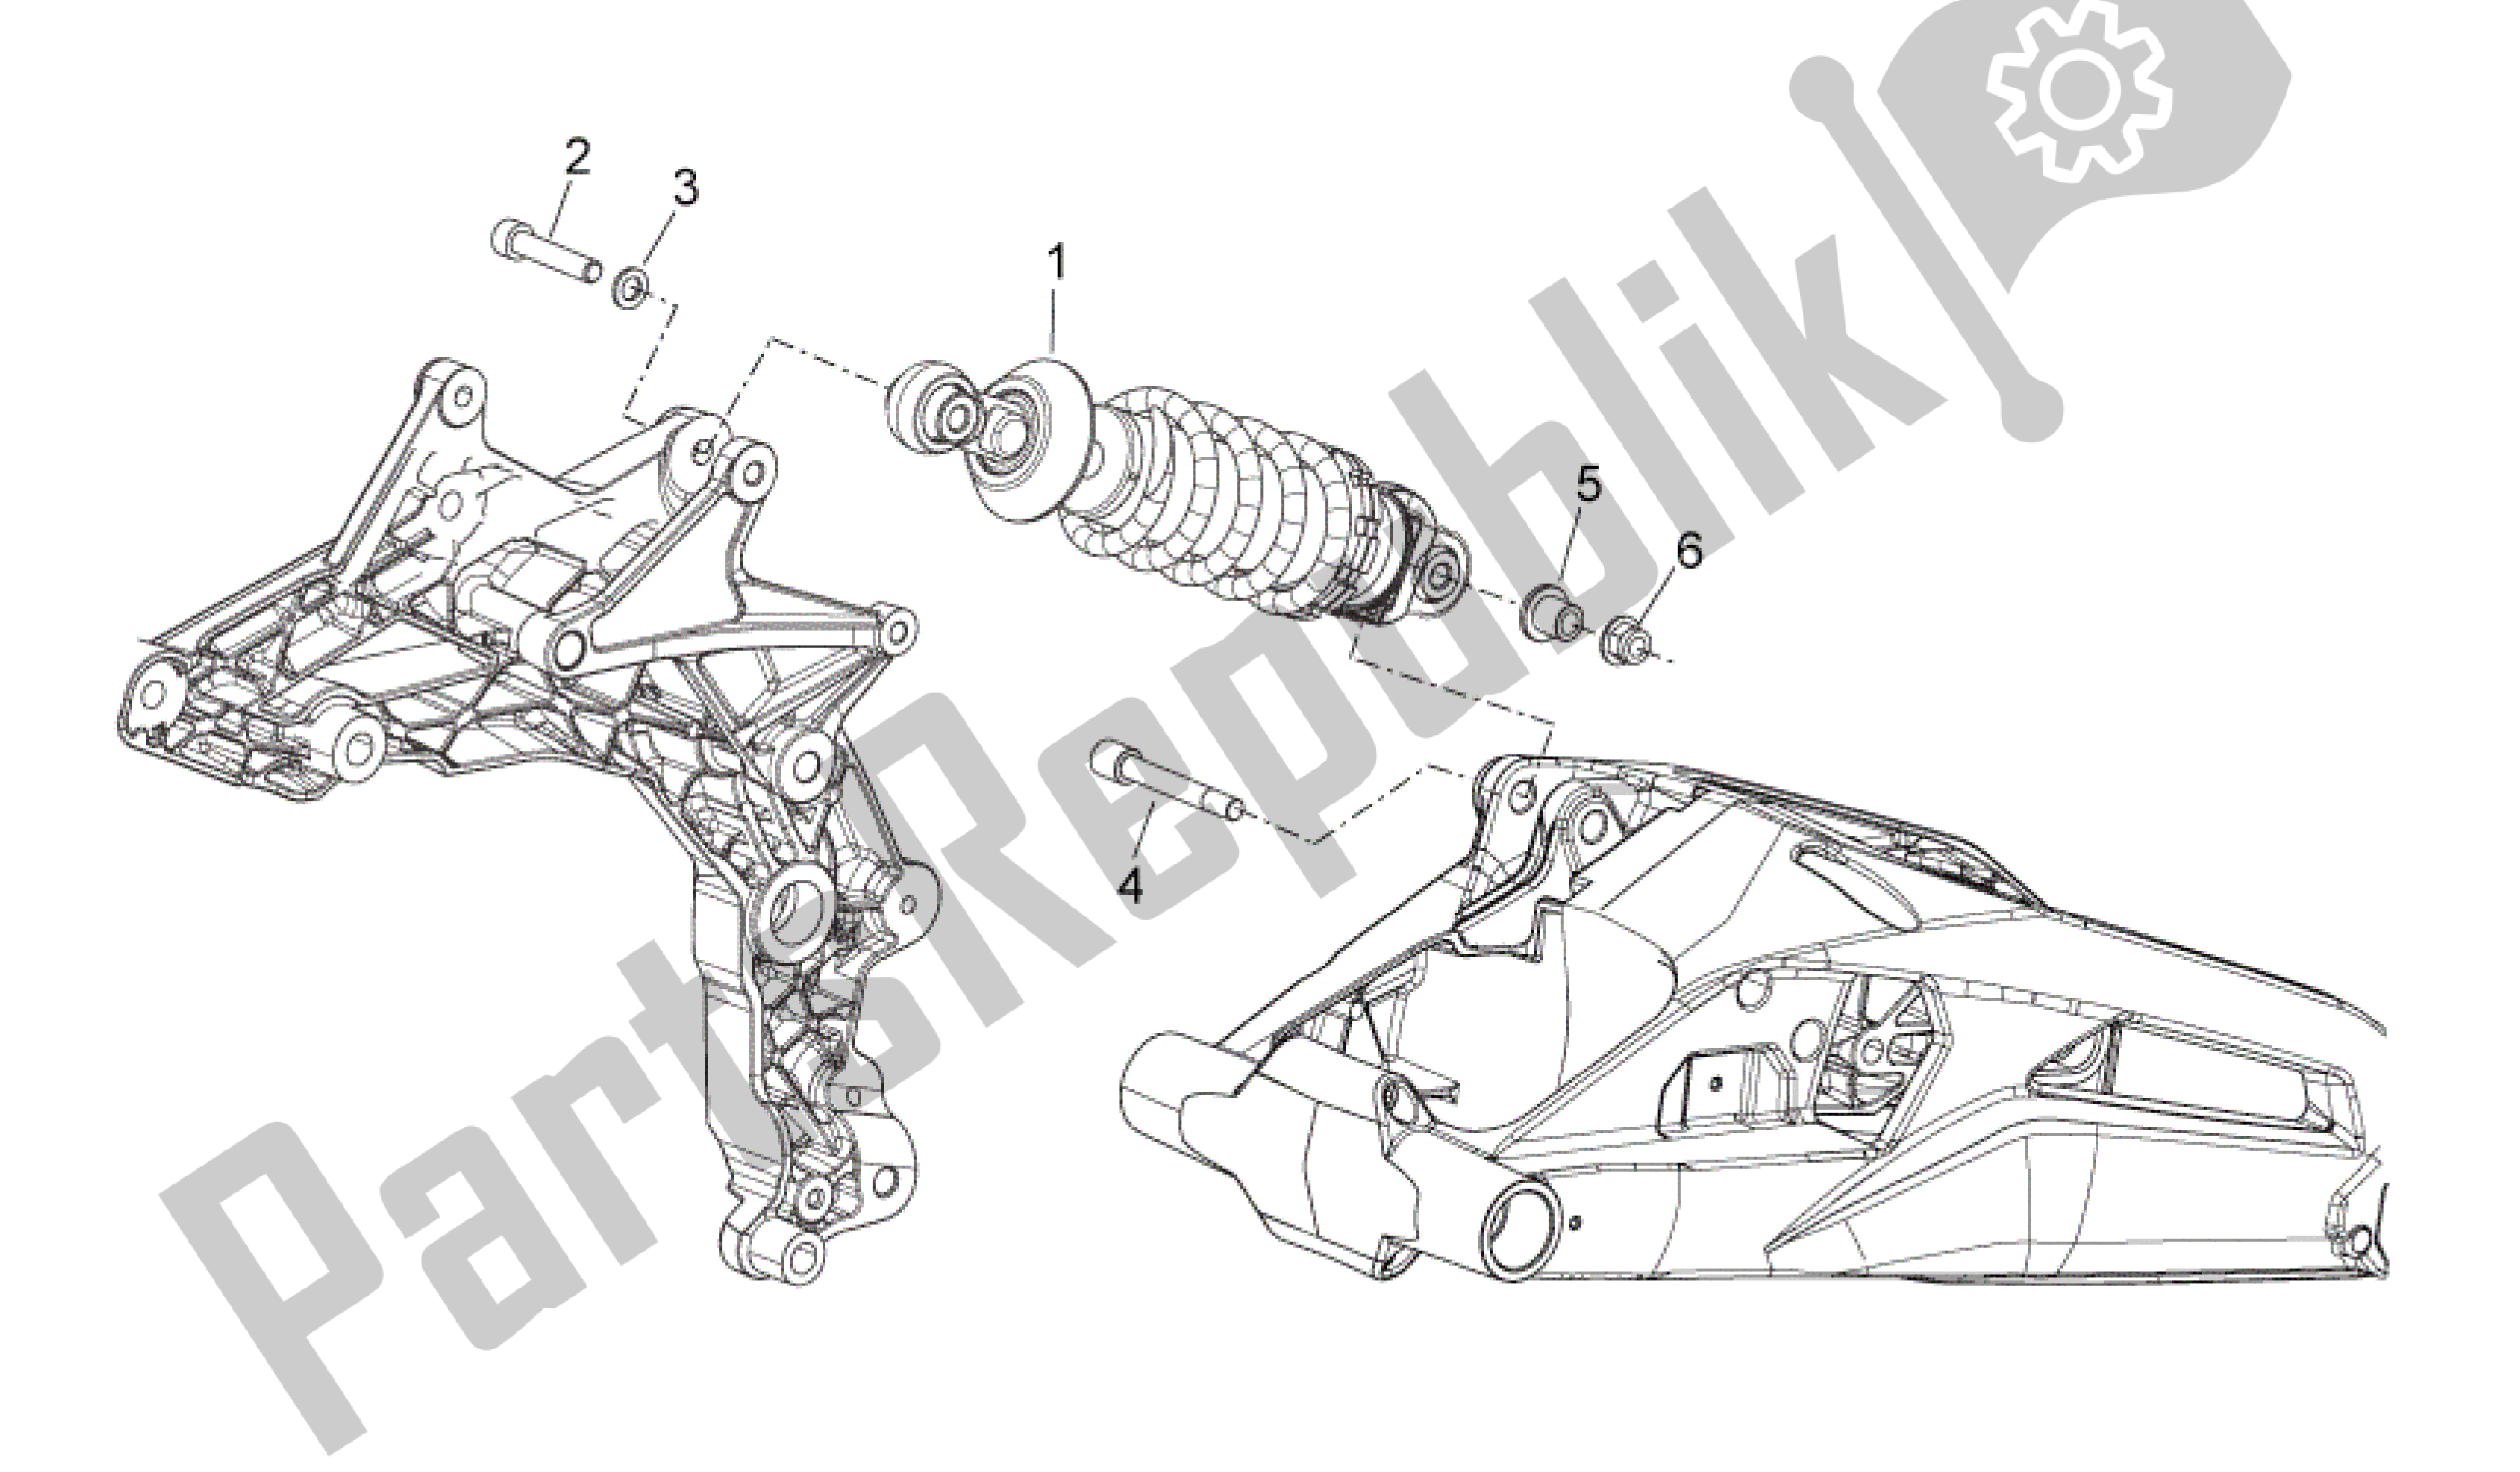 All parts for the Rear Shock Absorber of the Aprilia Shiver 750 2007 - 2009